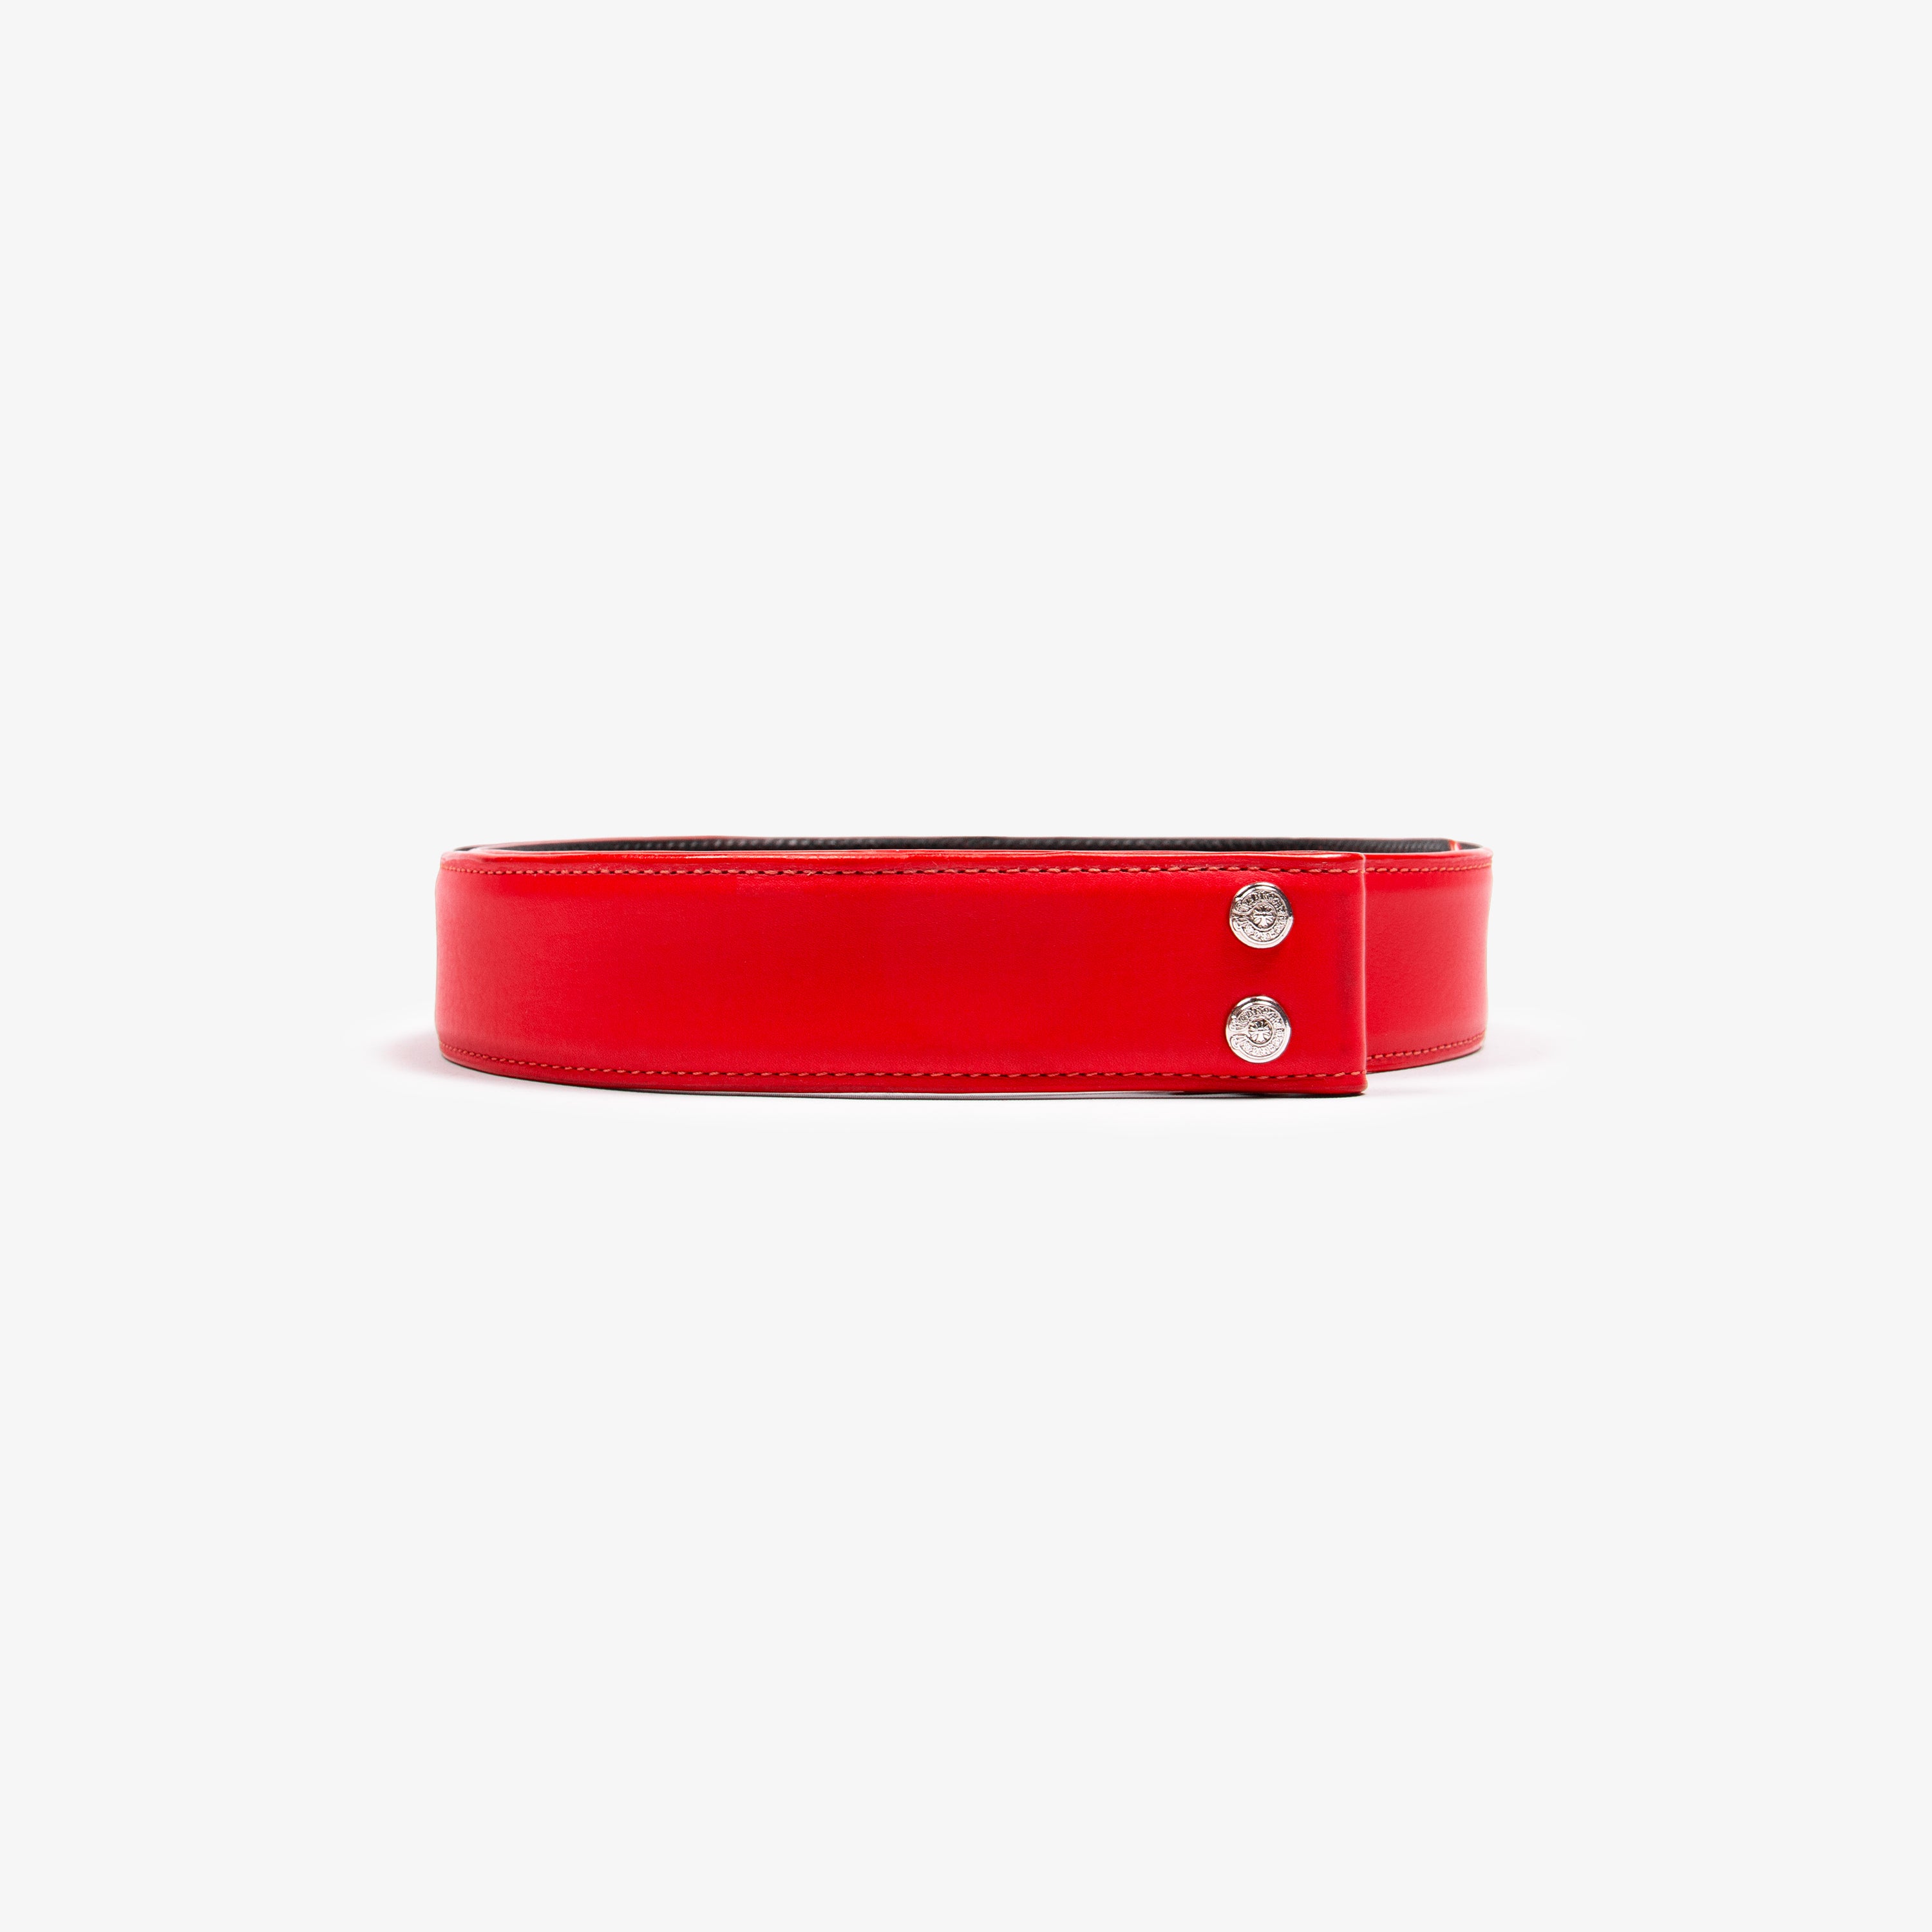 RED BELT STRAP (STAP ONLY)